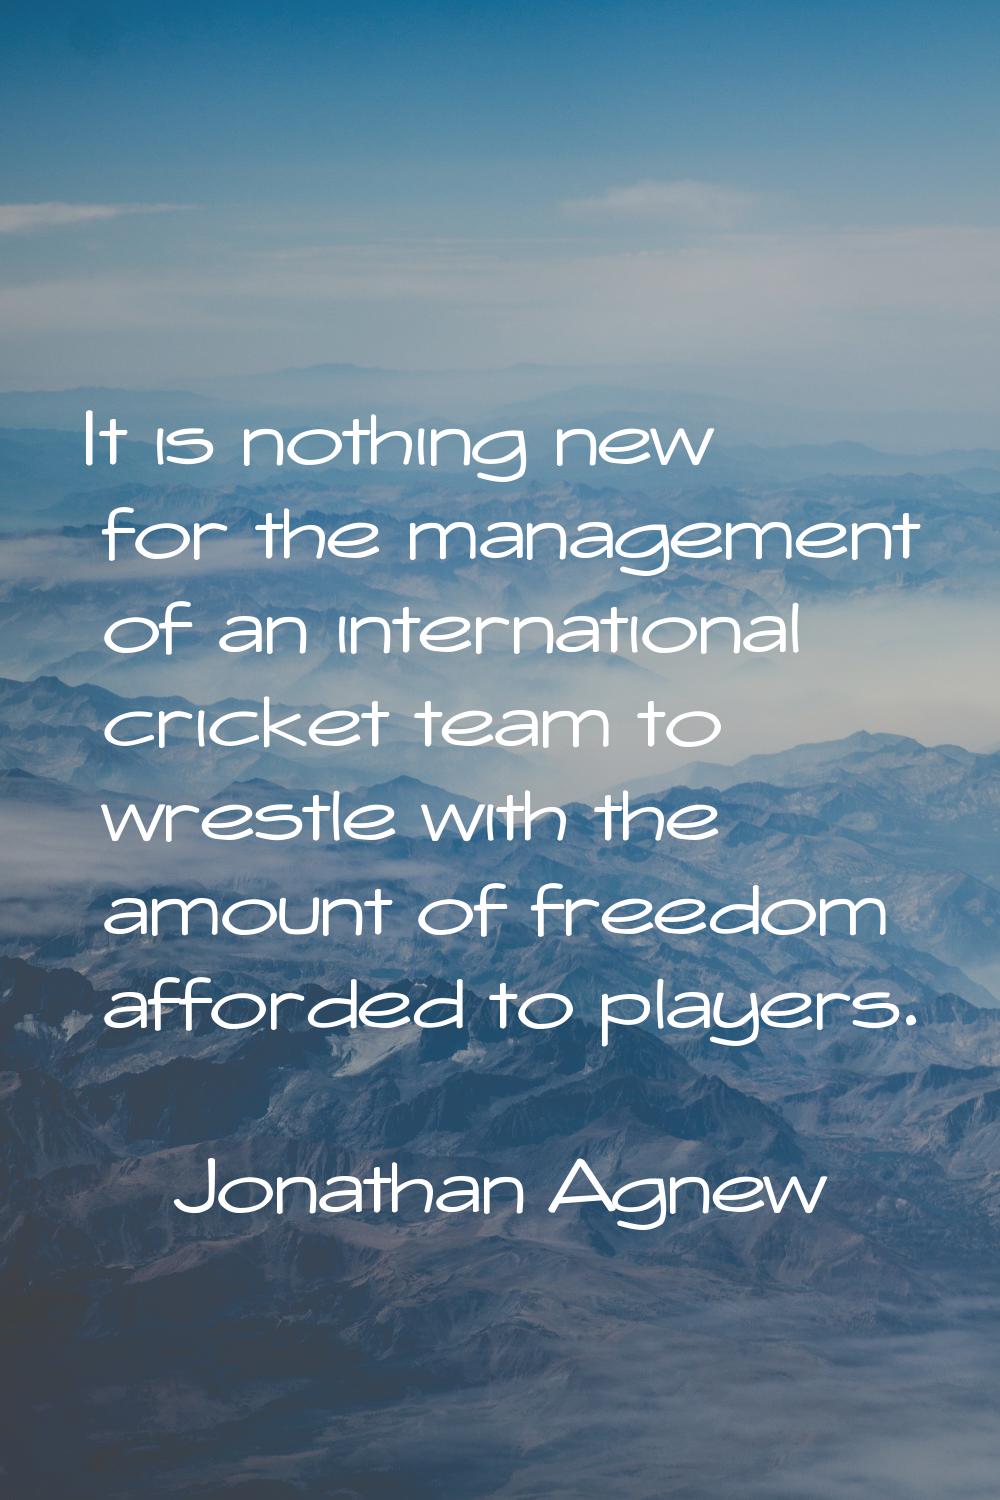 It is nothing new for the management of an international cricket team to wrestle with the amount of